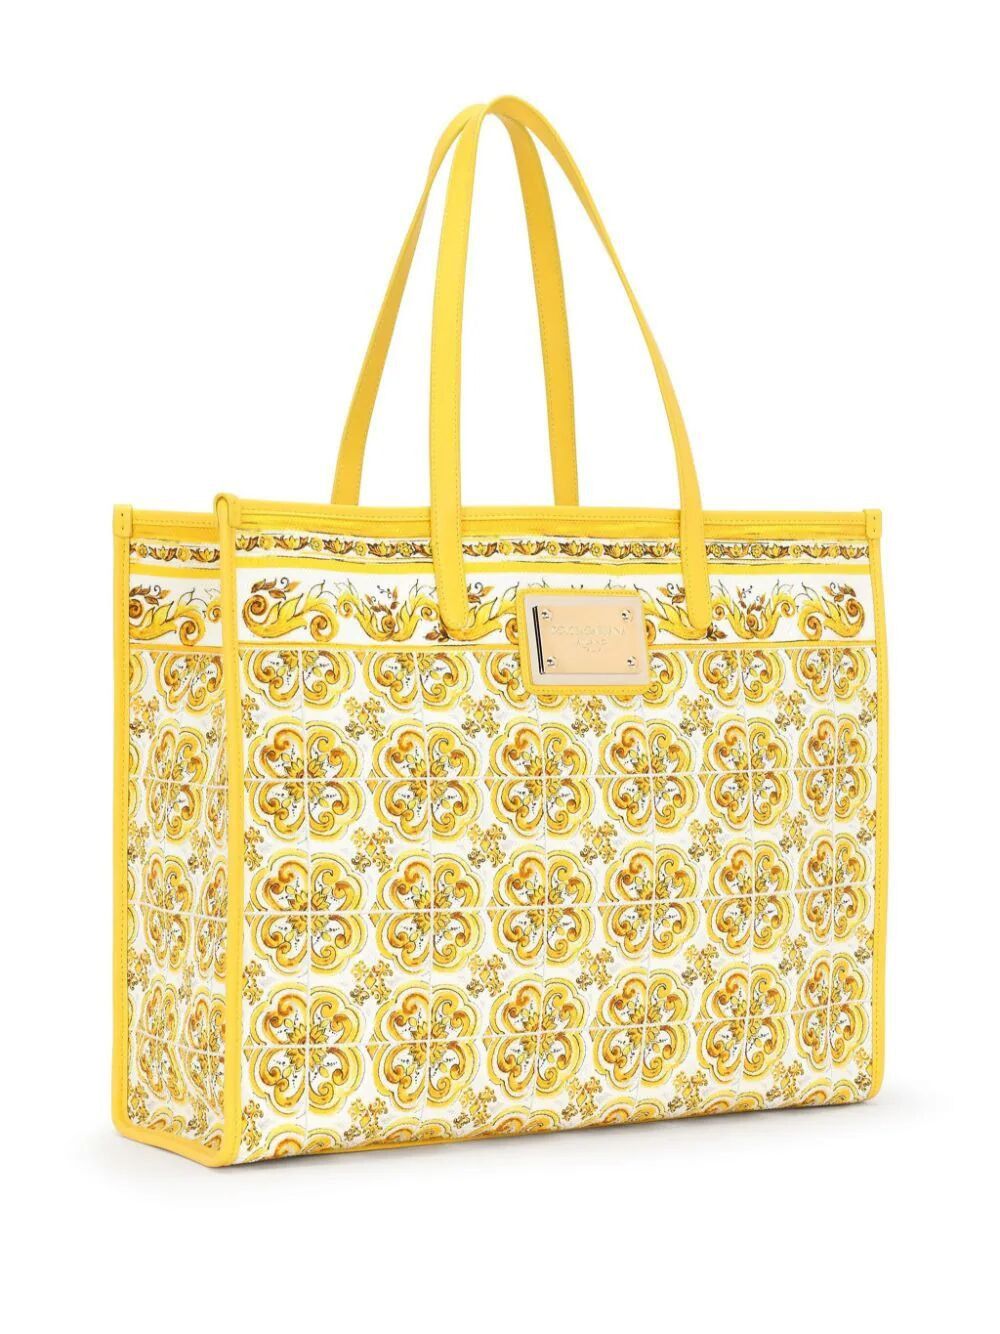 DOLCE & GABBANA Women's Large Yellow Canvas Tote Shopping Bag for Fall/Winter 2024